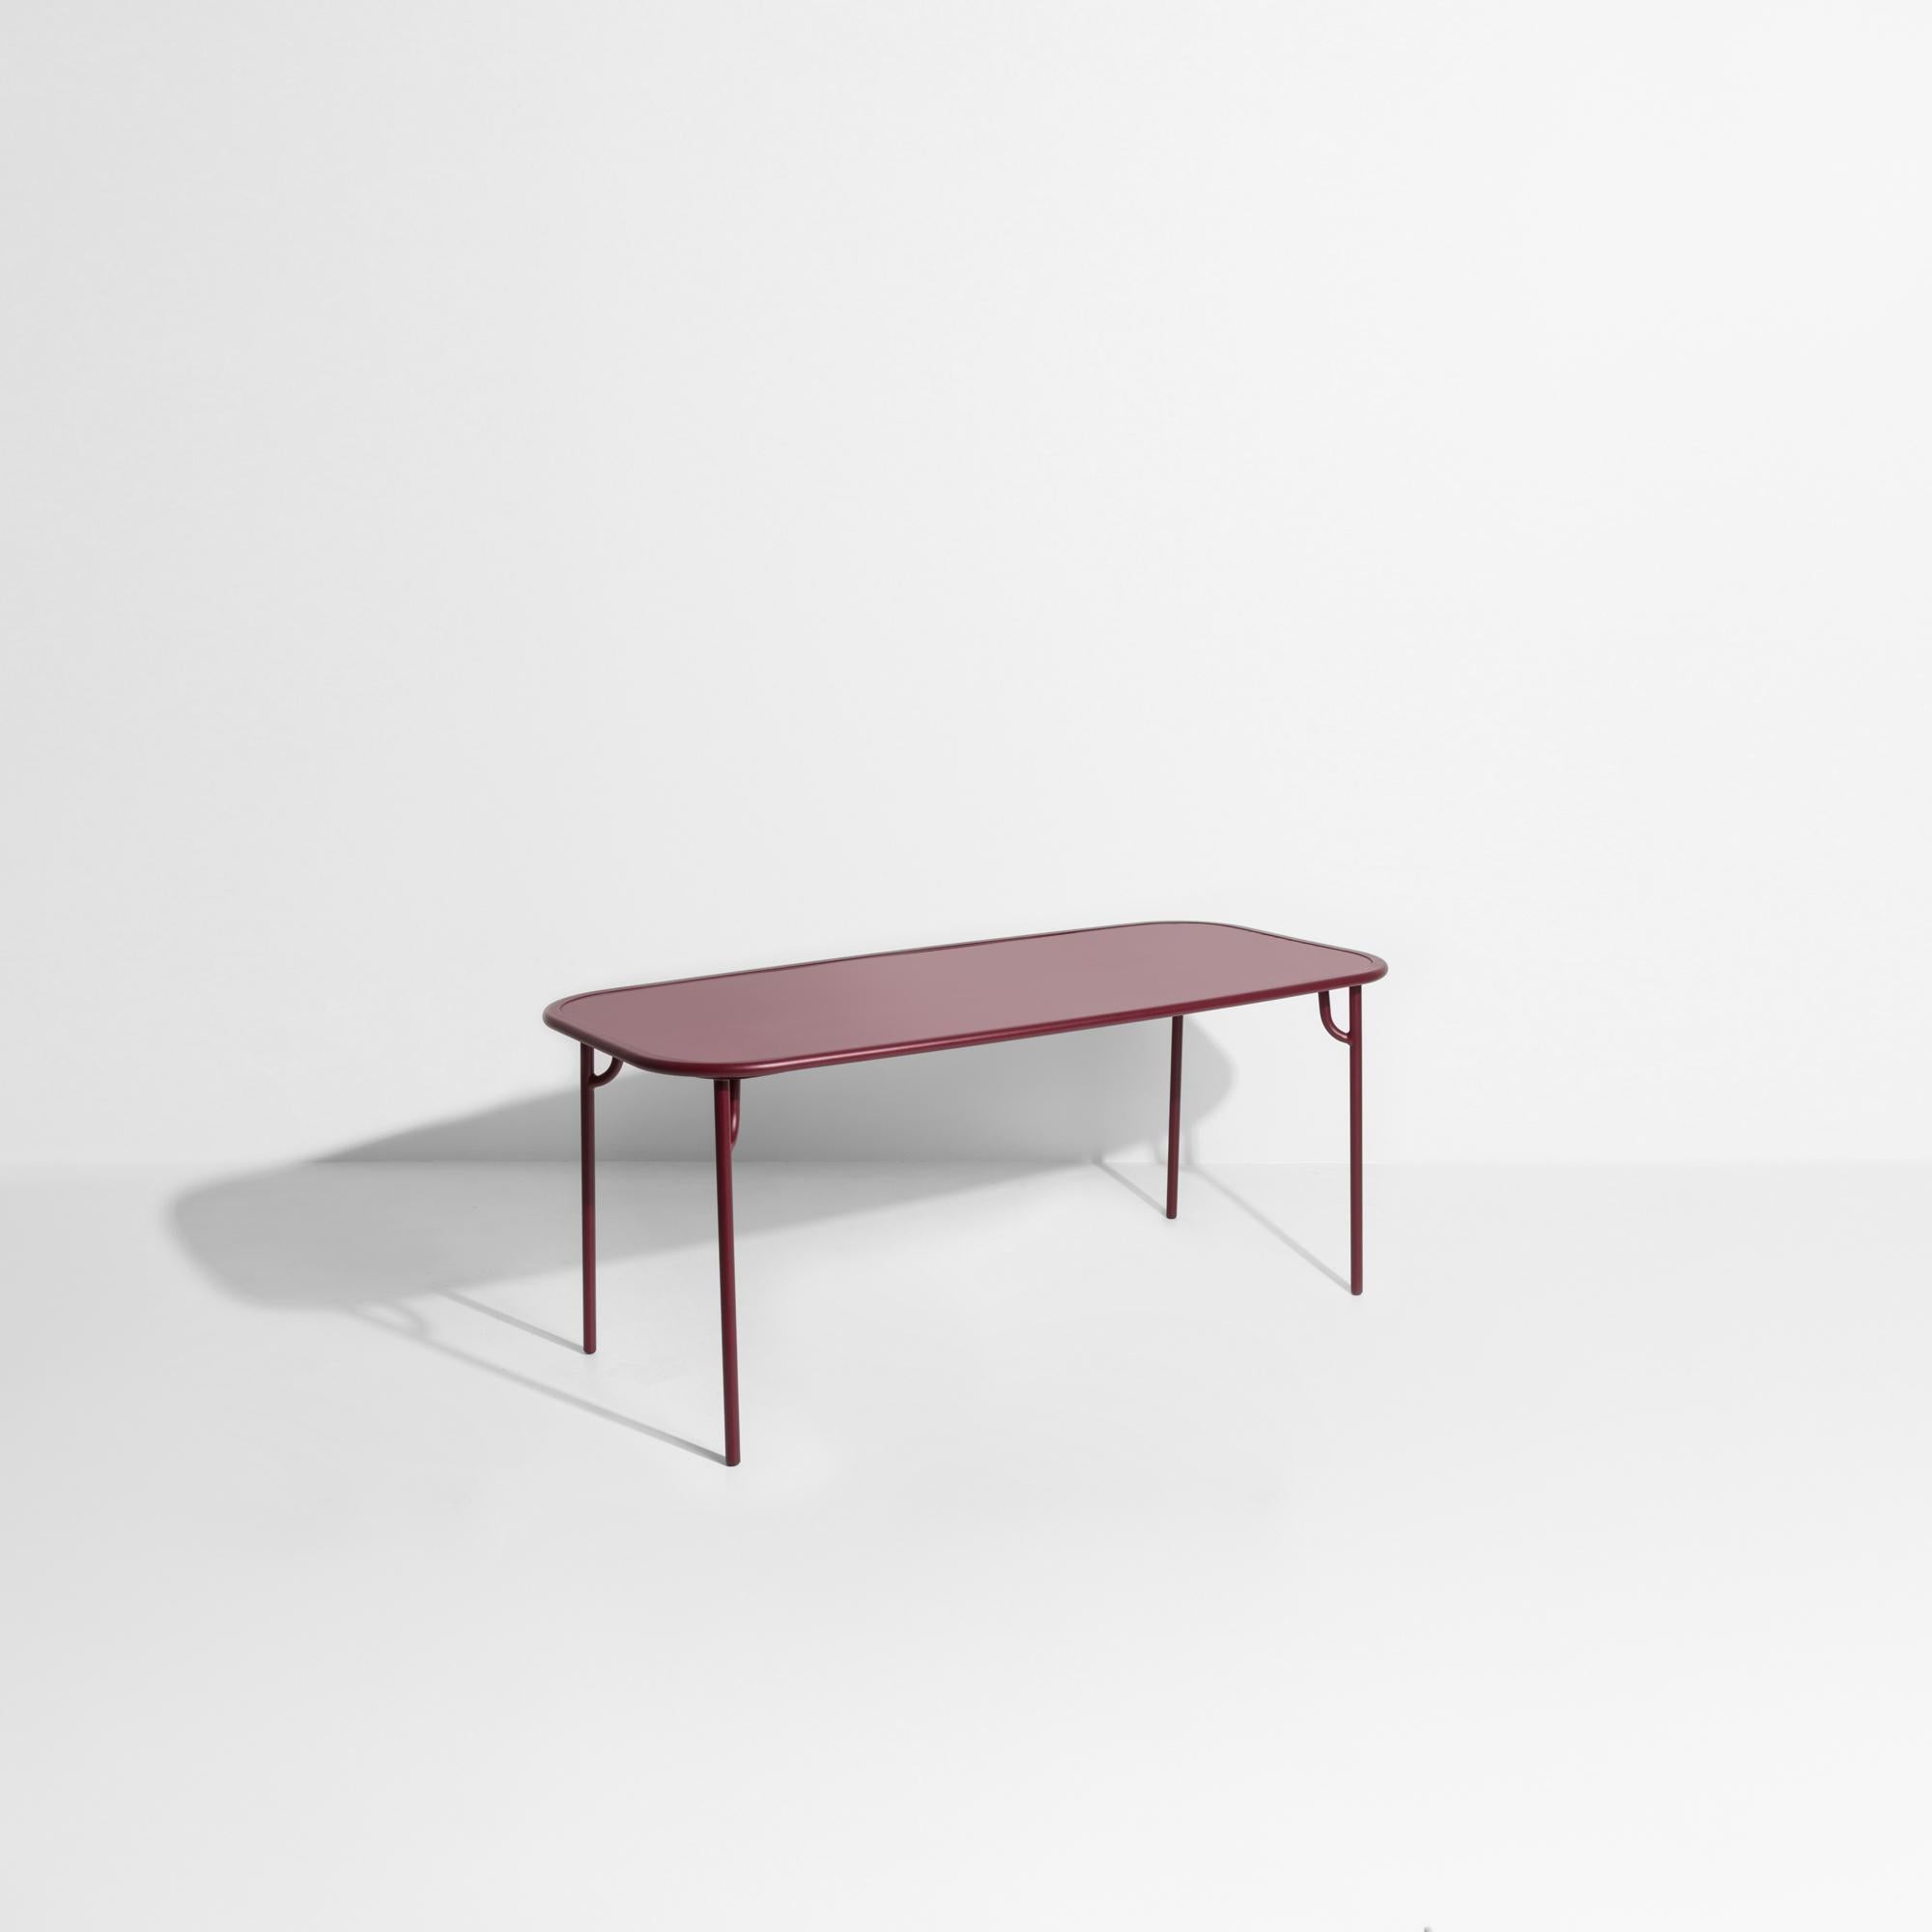 Petite Friture Week-End Medium Plain Rectangular Dining Table in Burgundy Aluminium by Studio BrichetZiegler, 2017

The week-end collection is a full range of outdoor furniture, in aluminium grained epoxy paint, matt finish, that includes 18